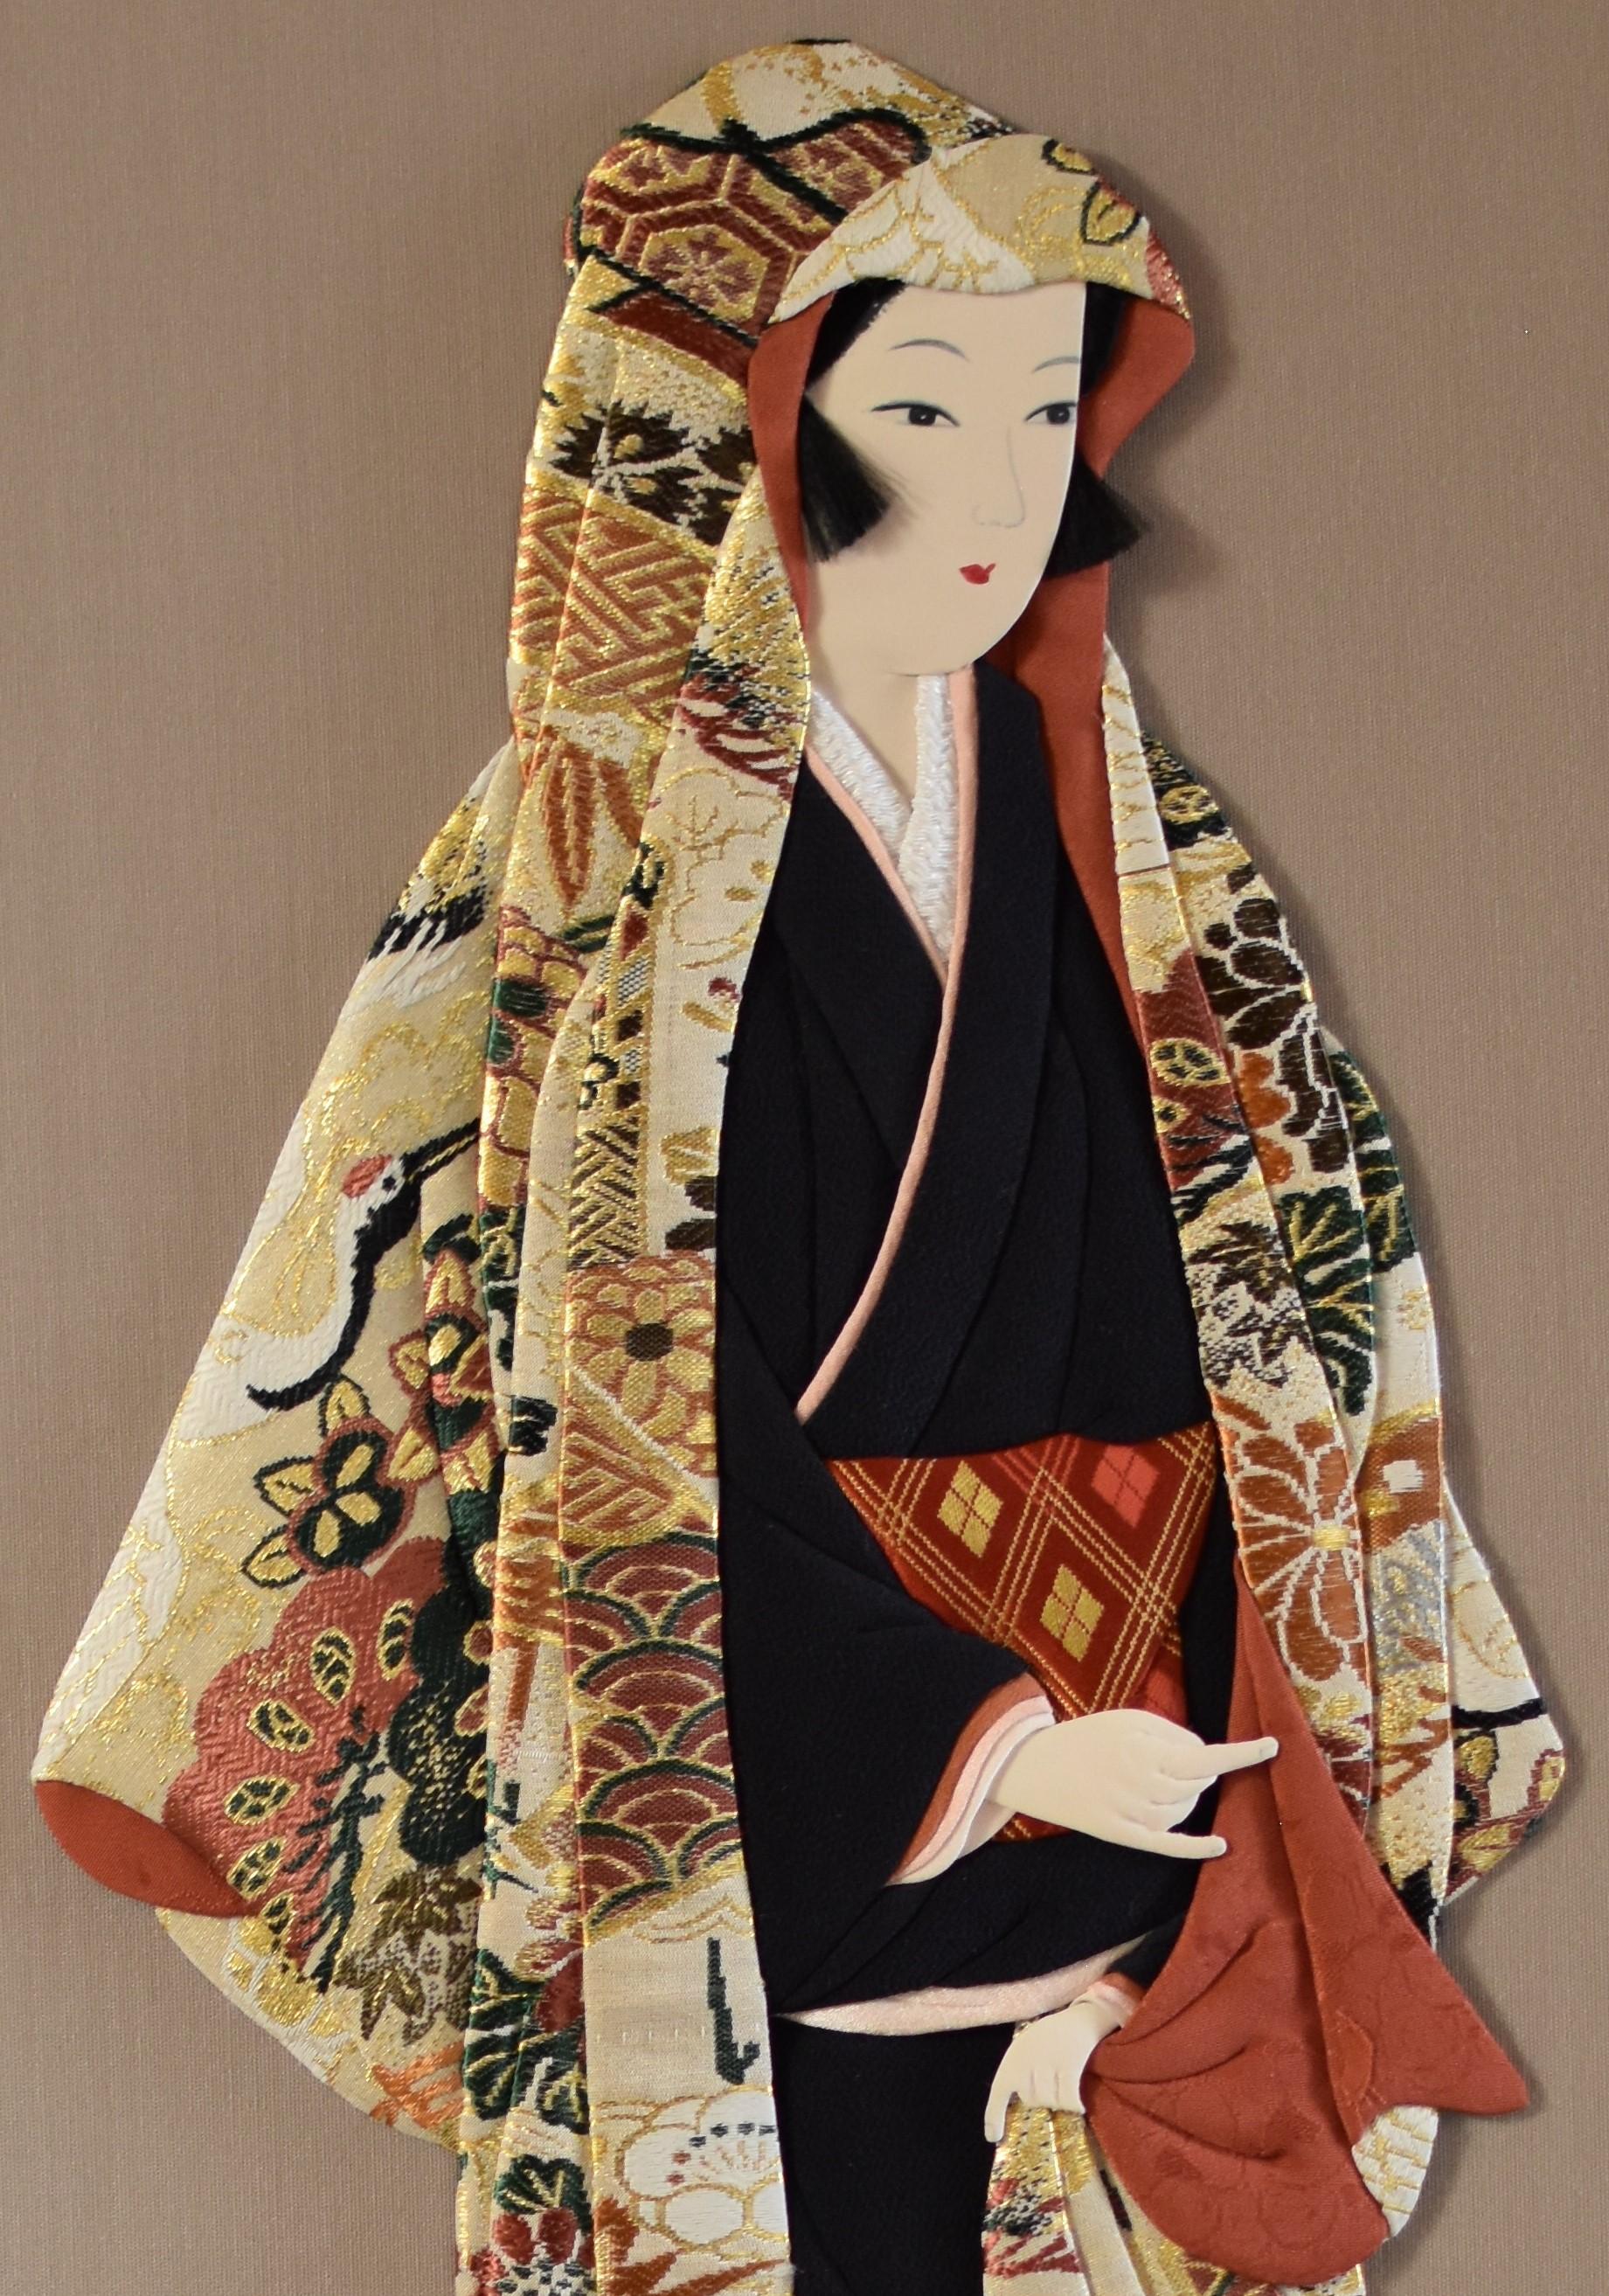 Extraordinary hand crafted Japanese contemporary traditional oshie decorative art piece with a stunning three-dimensional effect. This is a traditional Japanese handcrafted wall decorative art form using high quality kimono silk and brocade fabrics,